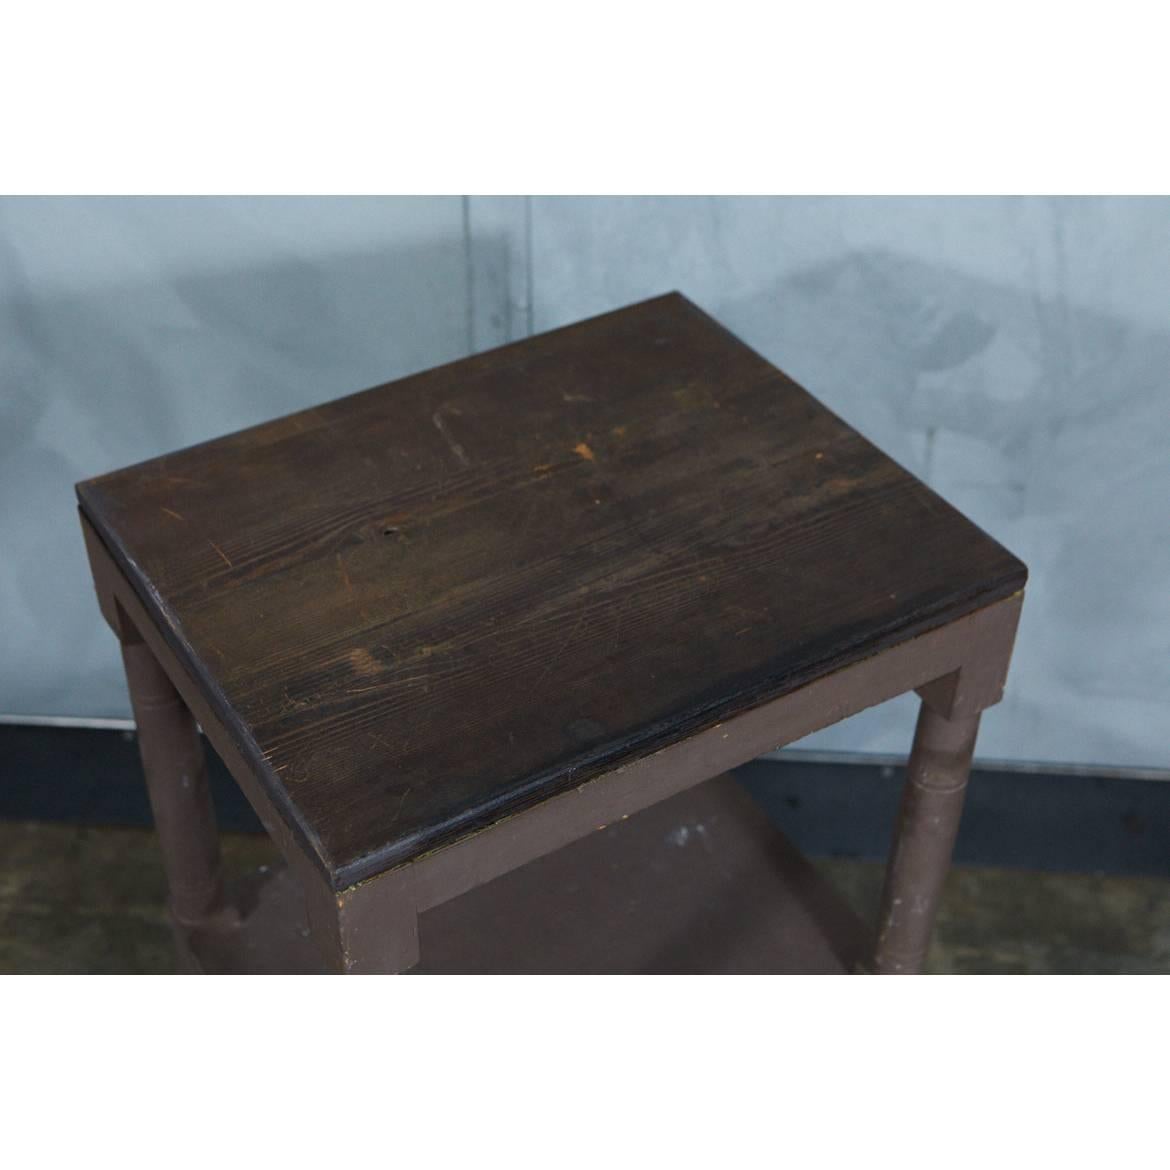 This American pine washstand is painted a nice brown with a stained wood top. It has nicely turned legs and feet with squared elements as well. 




 